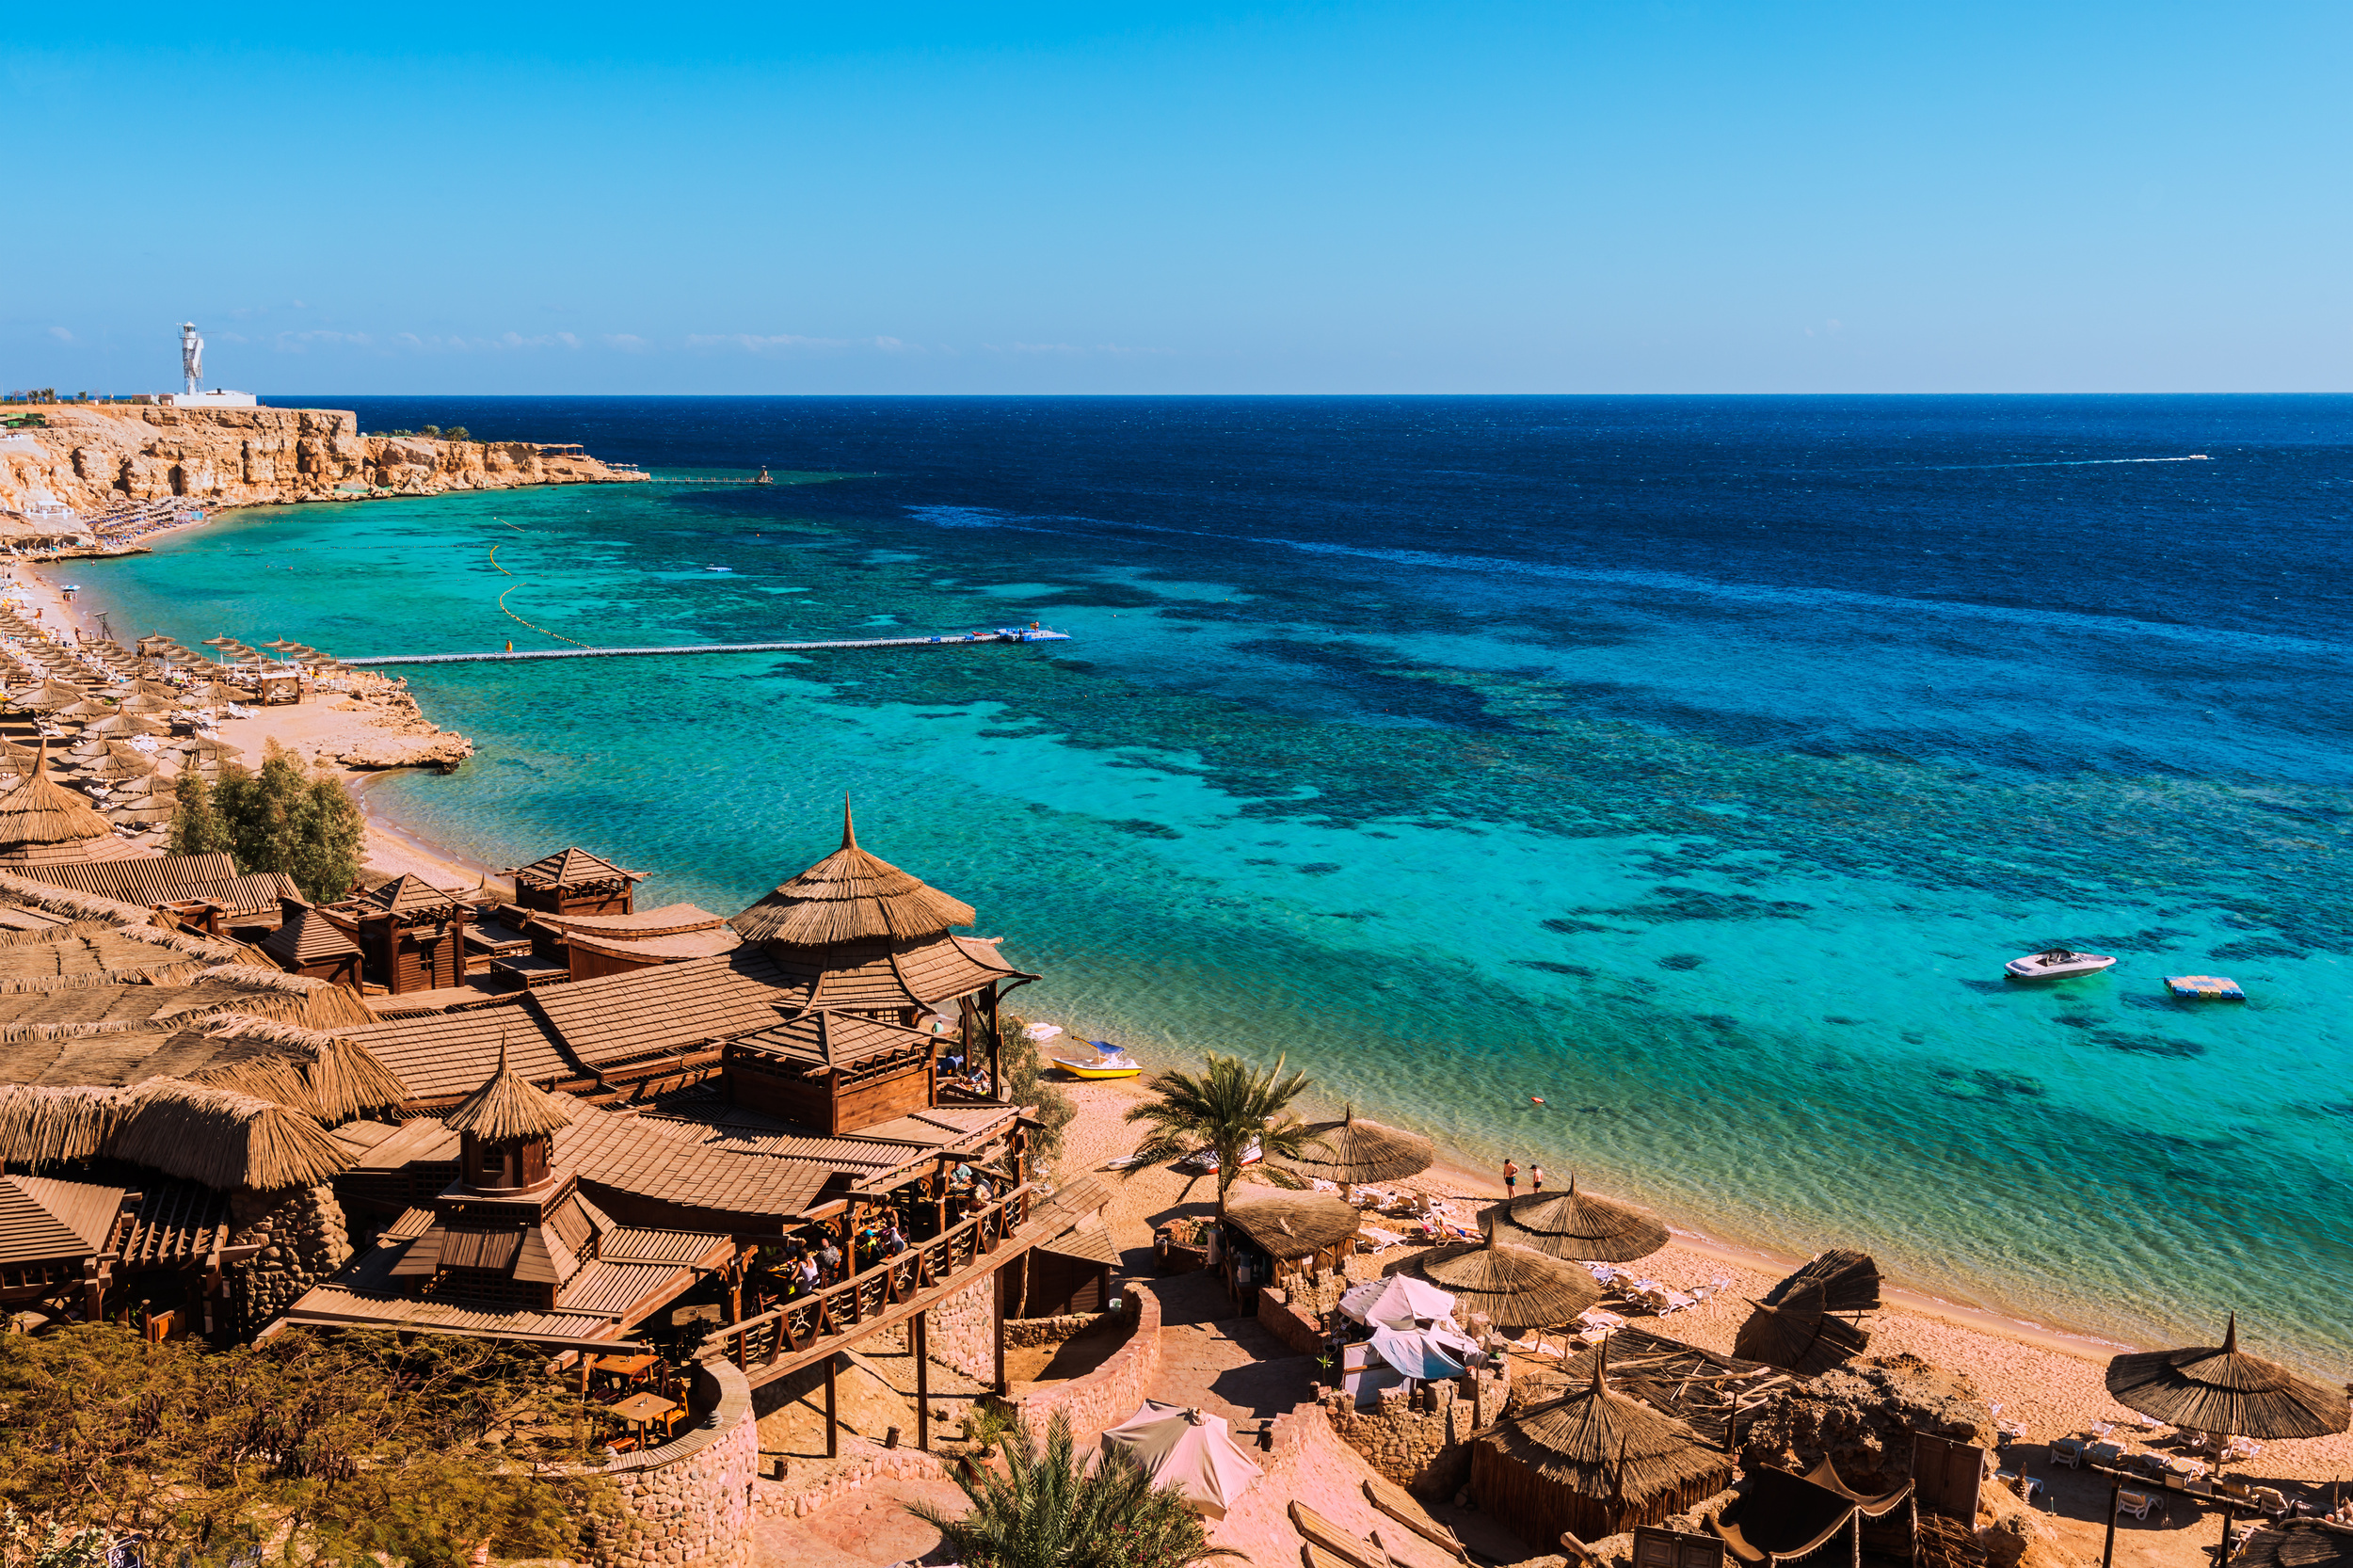 <p>The “cold” months in Egypt are still quite nice, with average temperatures in the 50s and 60s throughout winter. And the resort town of Sharm El-Sheikh is the place to be, with even warmer weather and access to the Red Sea! </p><p><a href='https://www.msn.com/en-us/community/channel/vid-cj9pqbr0vn9in2b6ddcd8sfgpfq6x6utp44fssrv6mc2gtybw0us'>Did you enjoy this slideshow? Follow us on MSN to see more of our exclusive lifestyle content.</a></p>